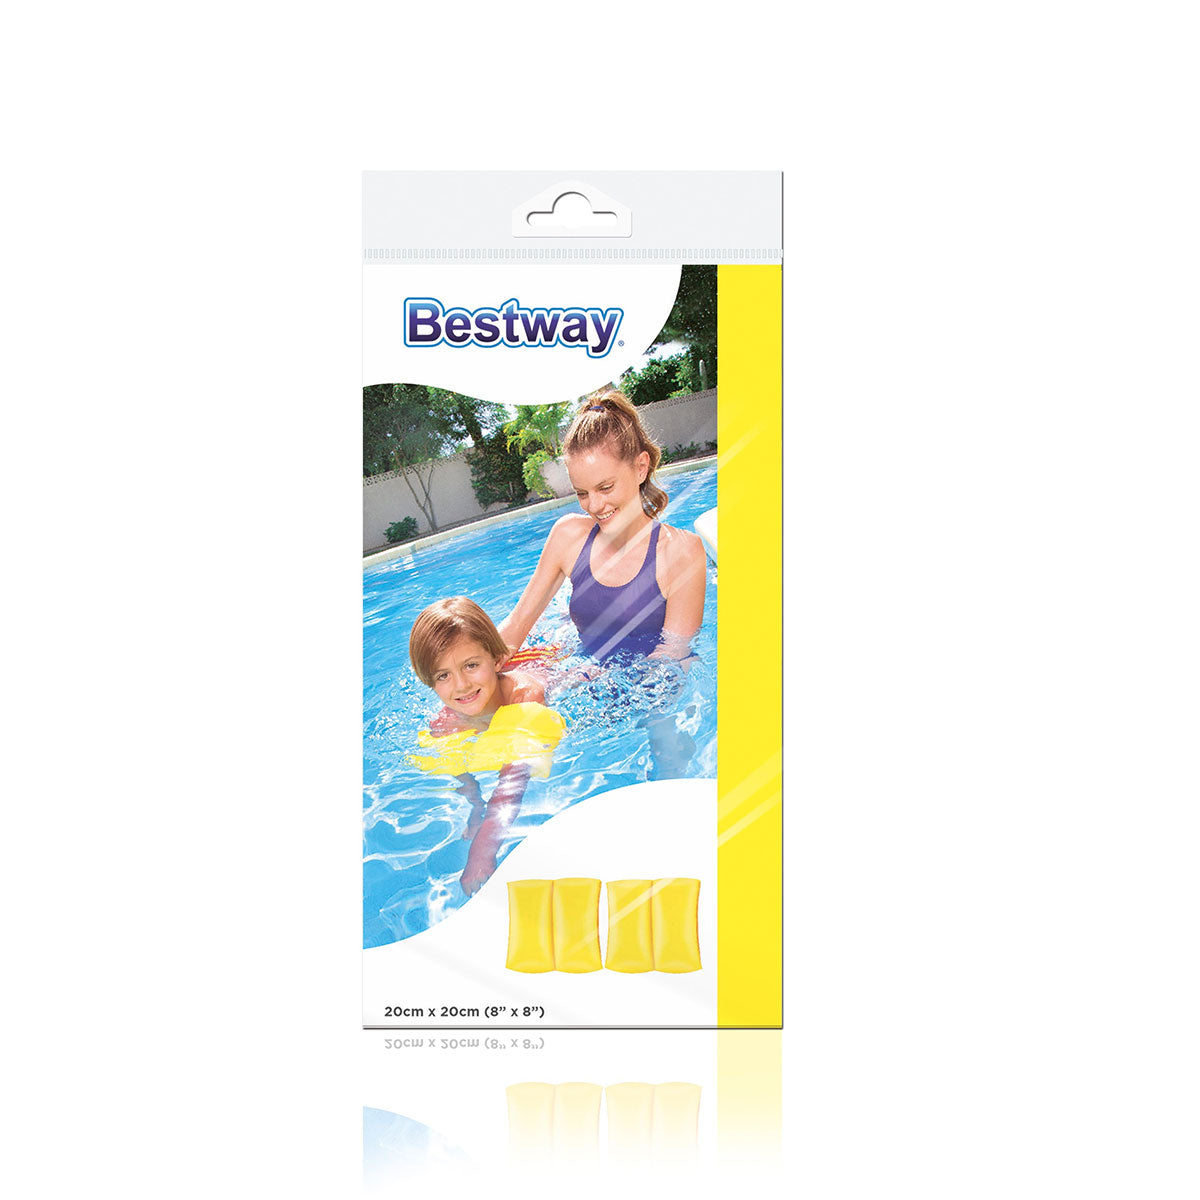 Bestway - Pool Armbands 32005 (Colors Vary - One Supplied)